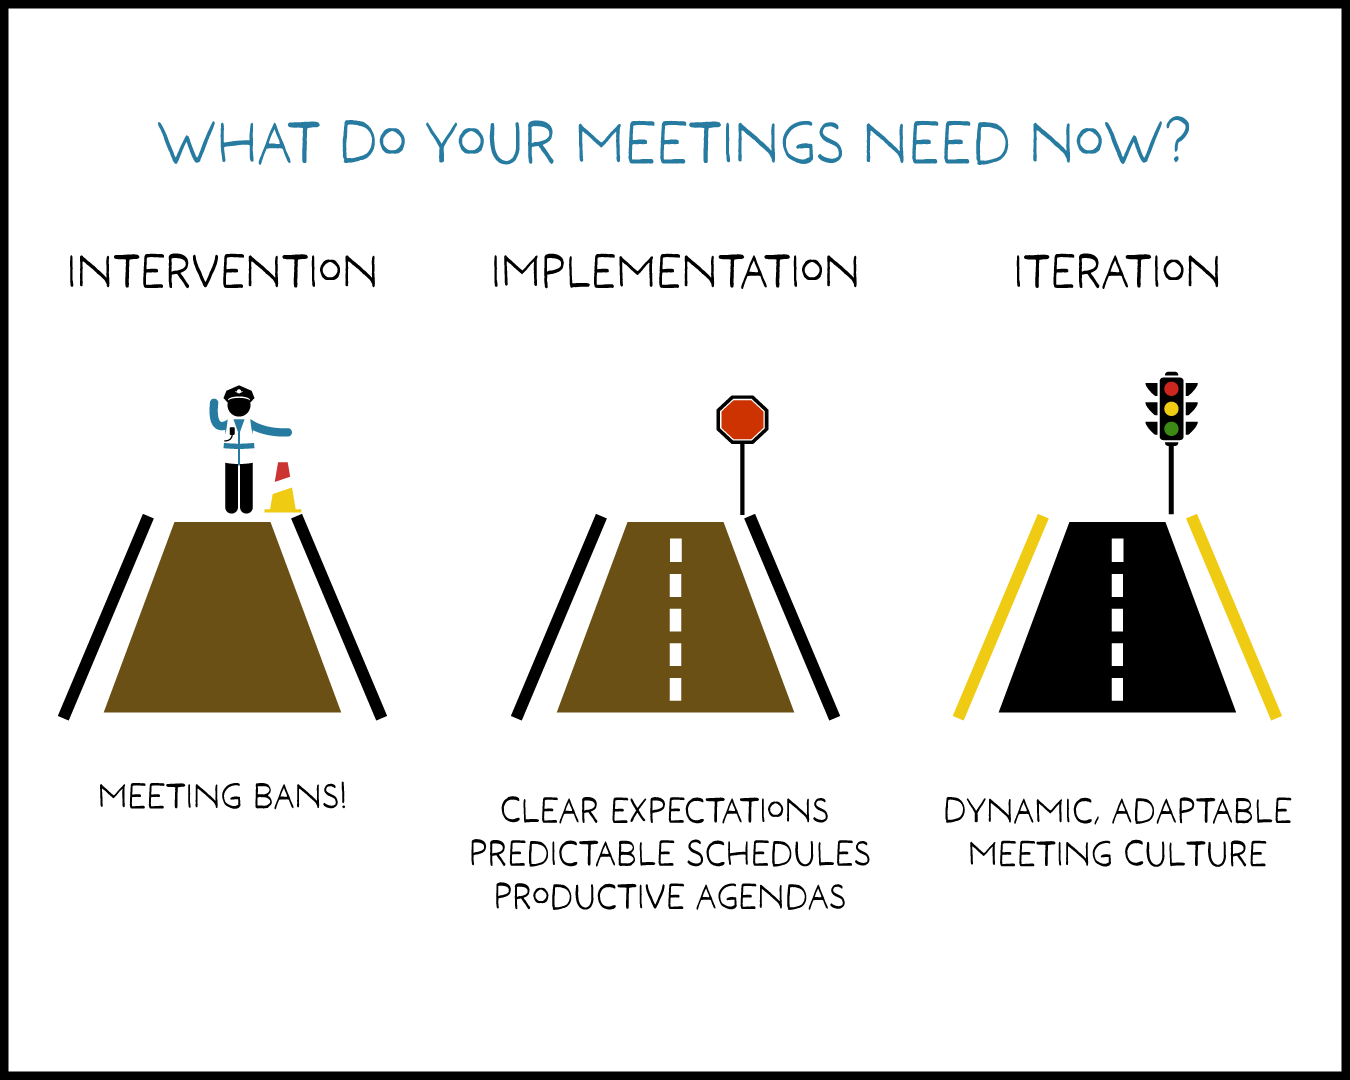 What do your meetings need now? Intervention, implementation, or iteration?